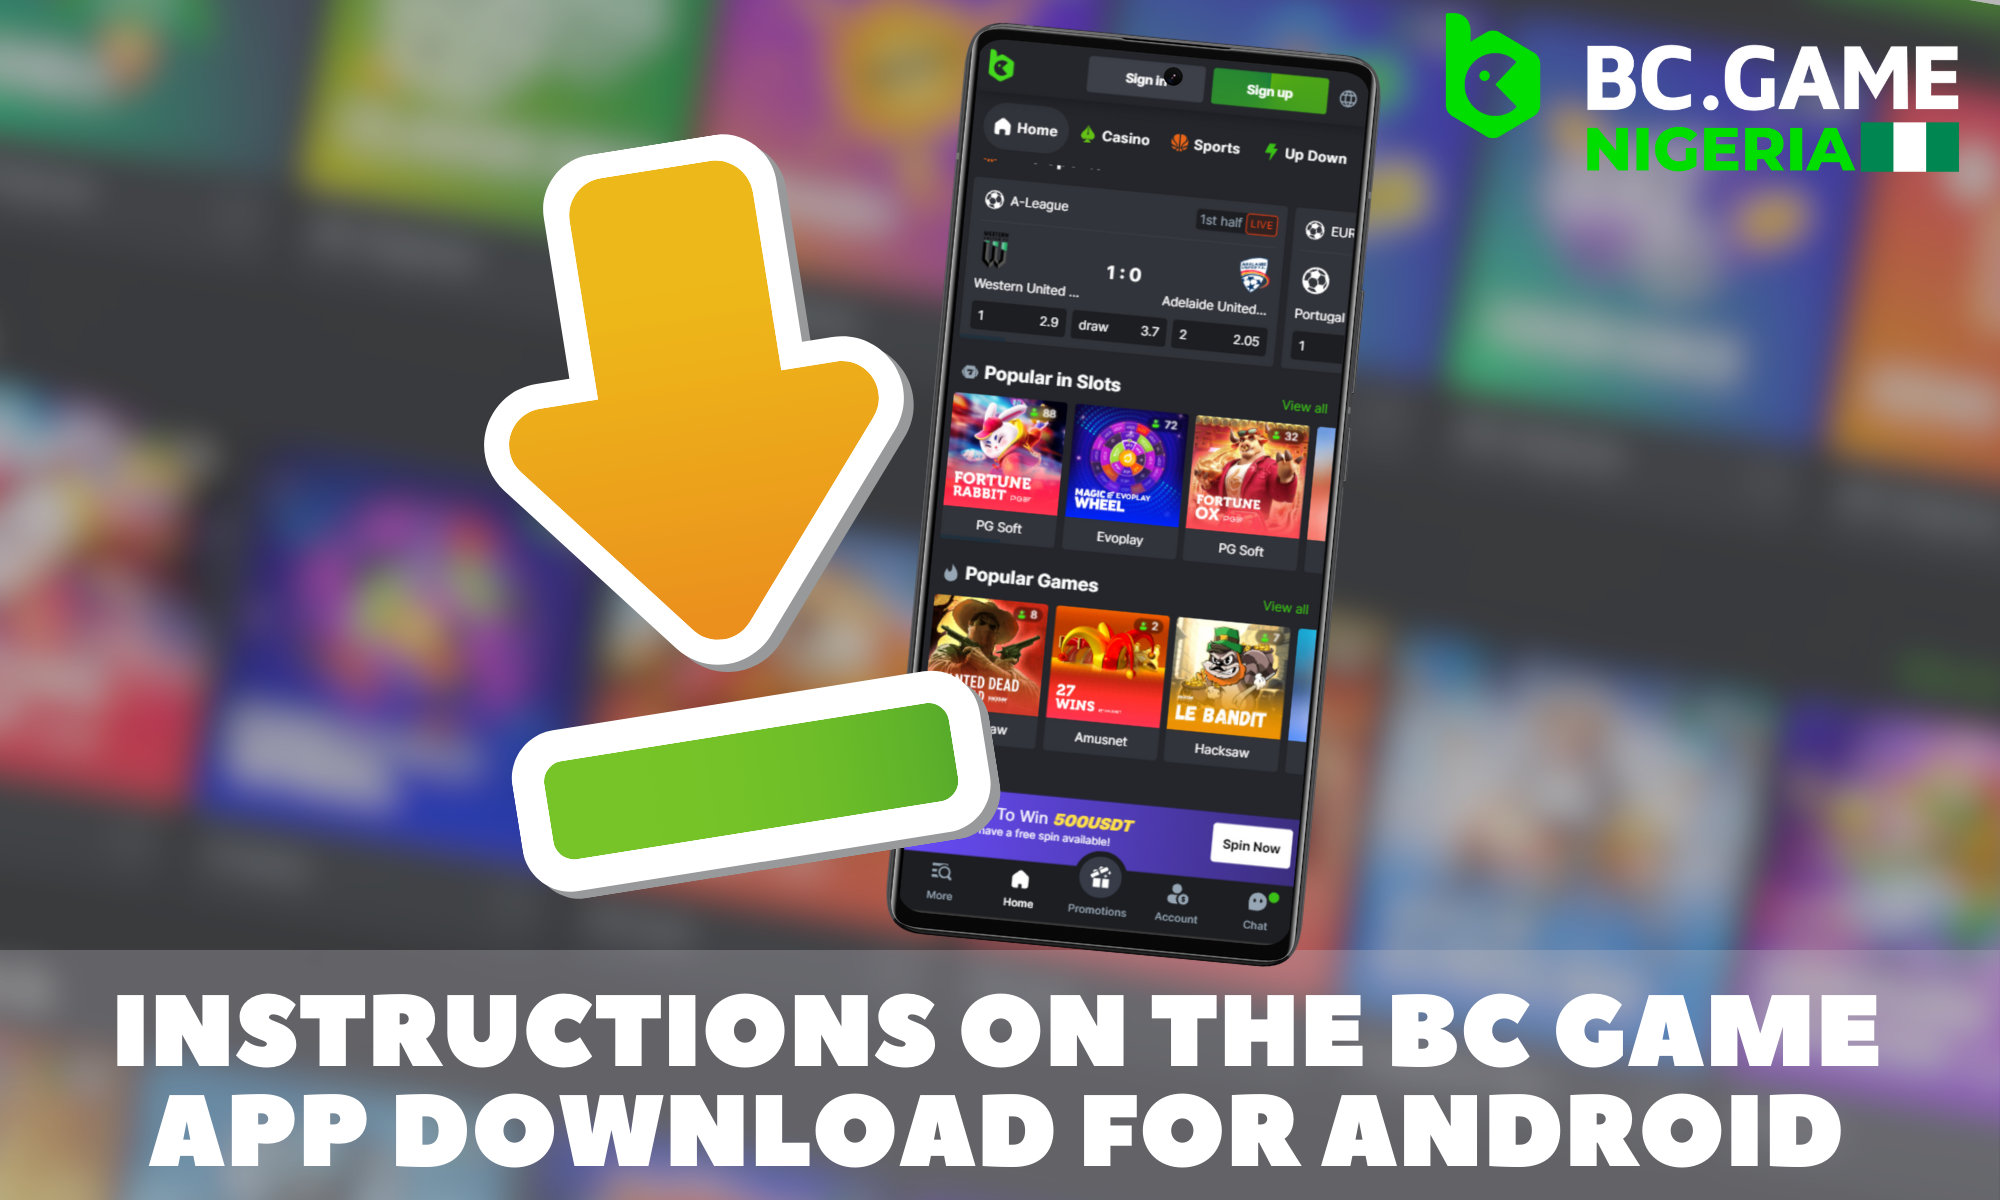 Step by step instructions on how to download the BC Game app for Android